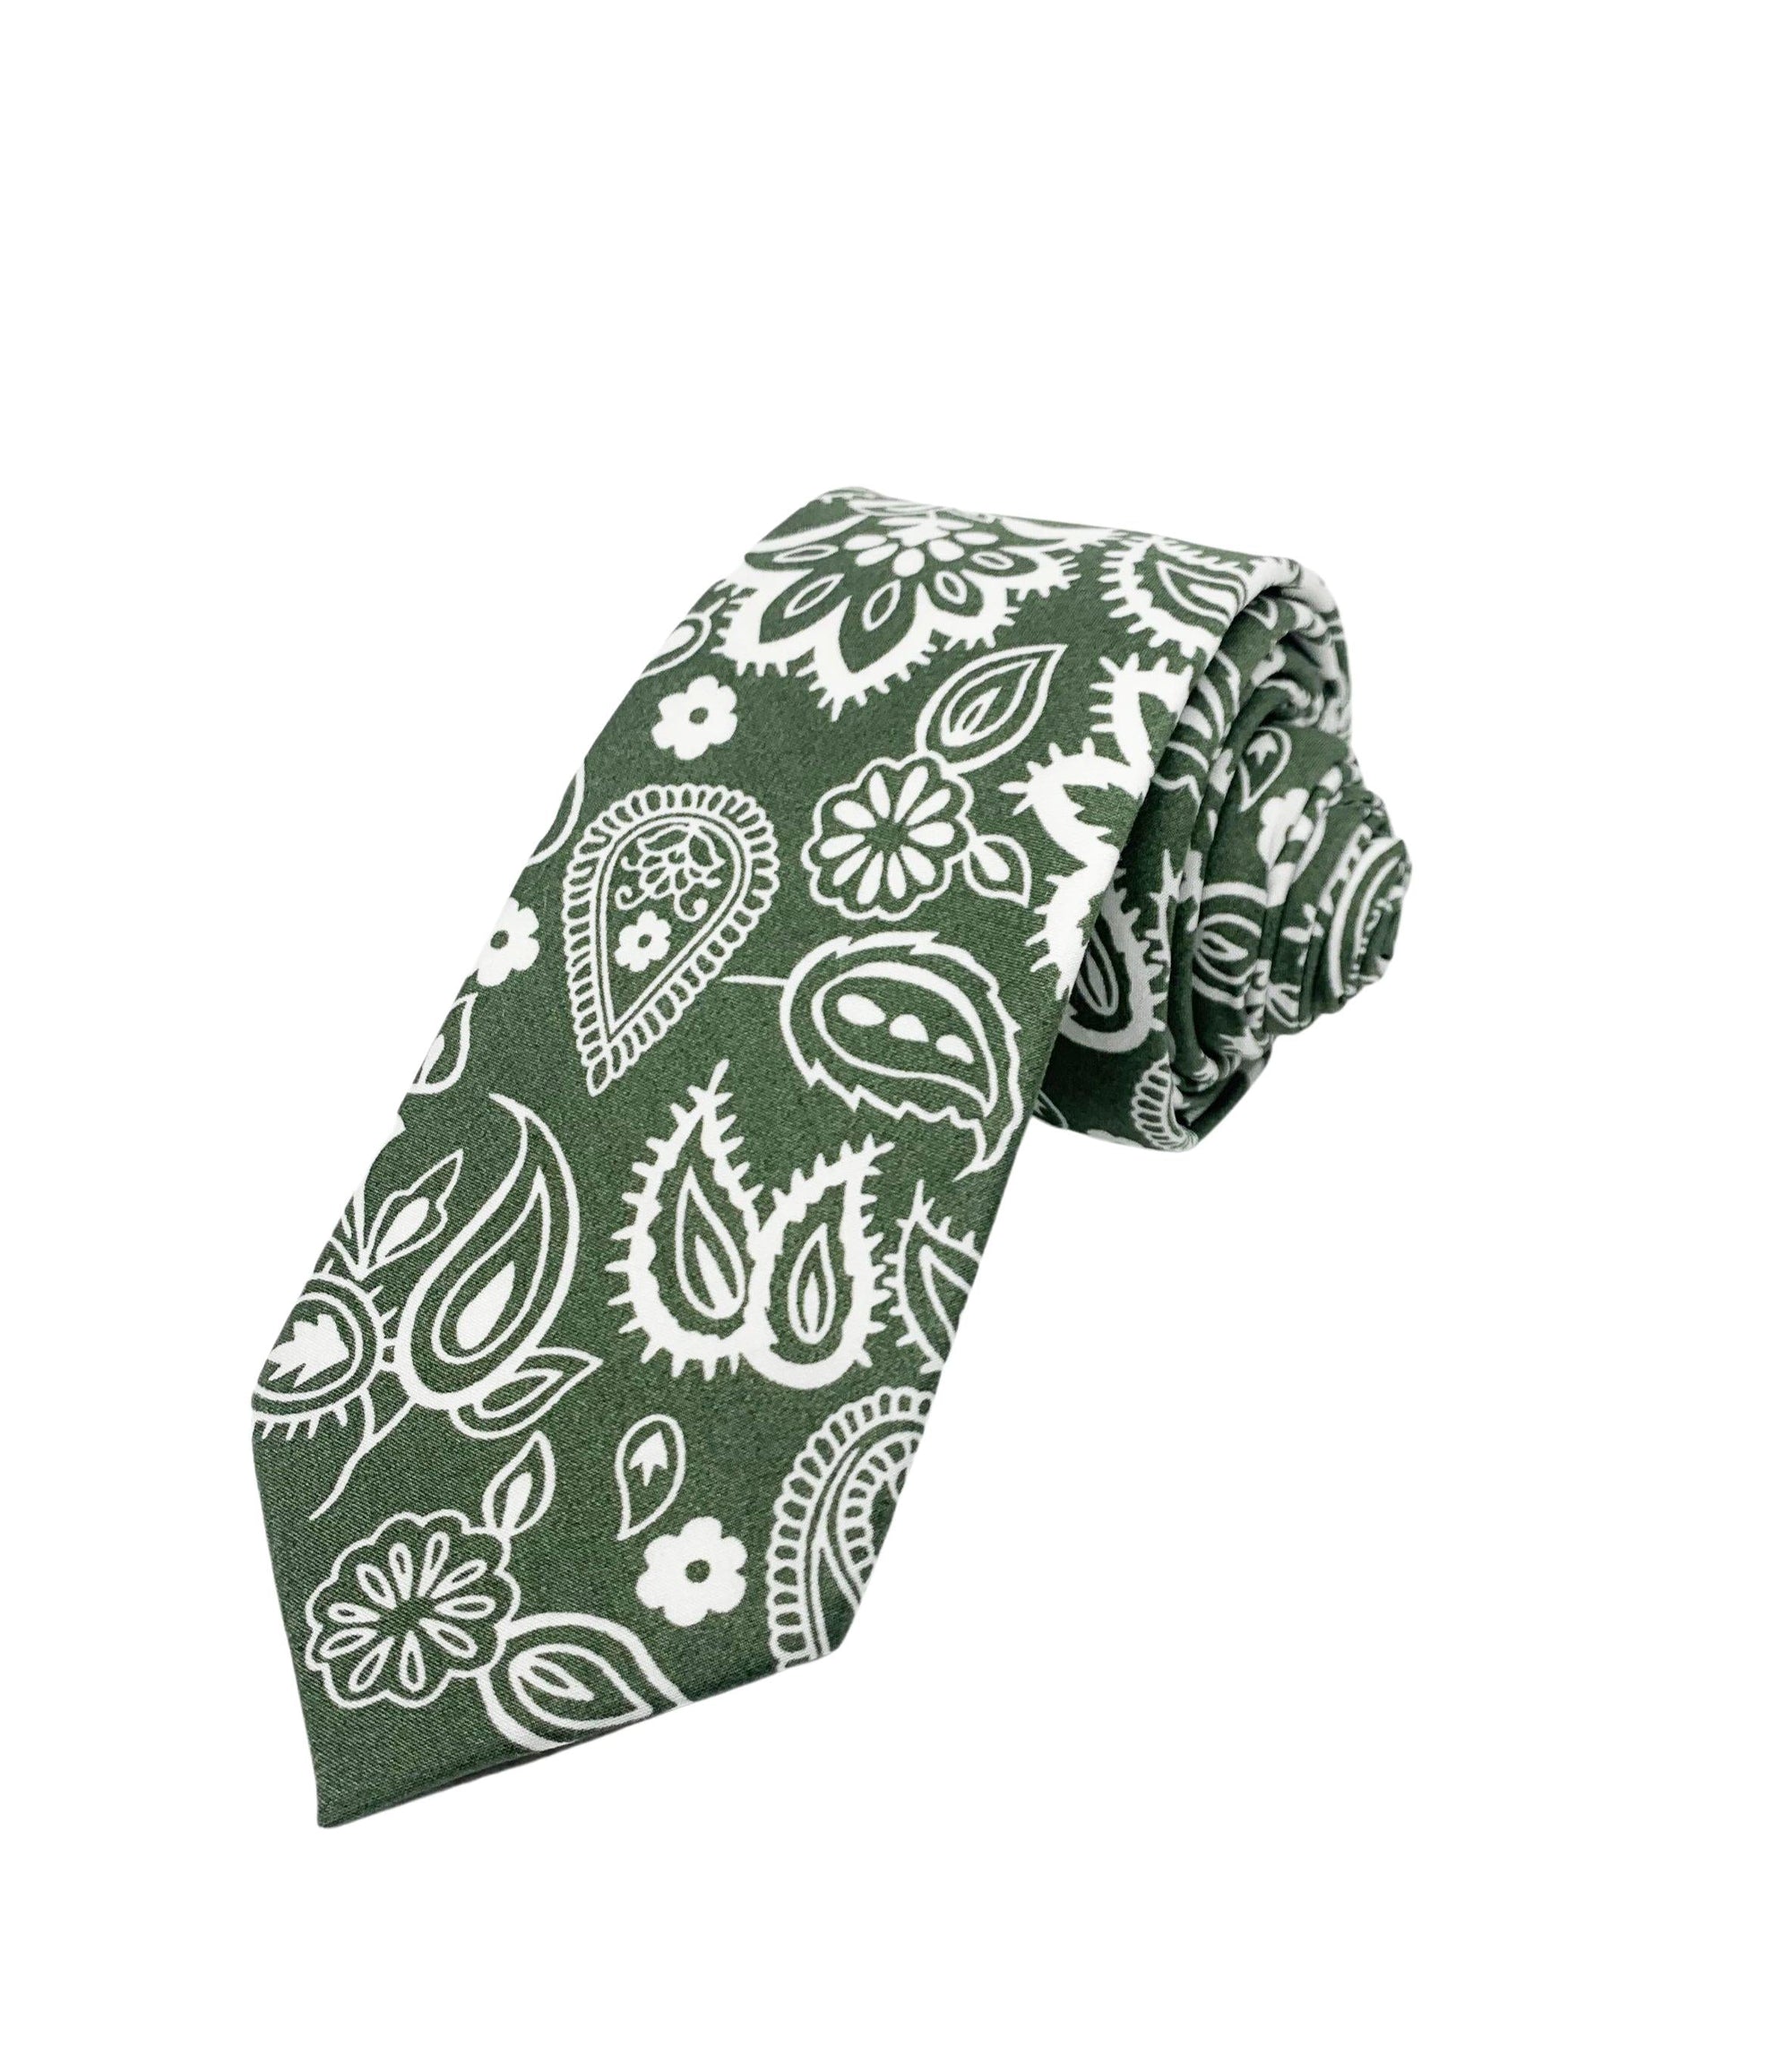 Floral Tie Green Skinny TIes for men PAISLEY mytieshop-Neckties-Floral Tie Green Skinny TIes for weddings and events, great for prom and anniversary gifts. Mens floral ties near me us ties tie shops cool-Mytieshop. Skinny ties for weddings anniversaries. Father of bride. Groomsmen. Cool skinny neckties for men. Neckwear for prom, missions and fancy events. Gift ideas for men. Anniversaries ideas. Wedding aesthetics. Flower ties. Dry flower ties.